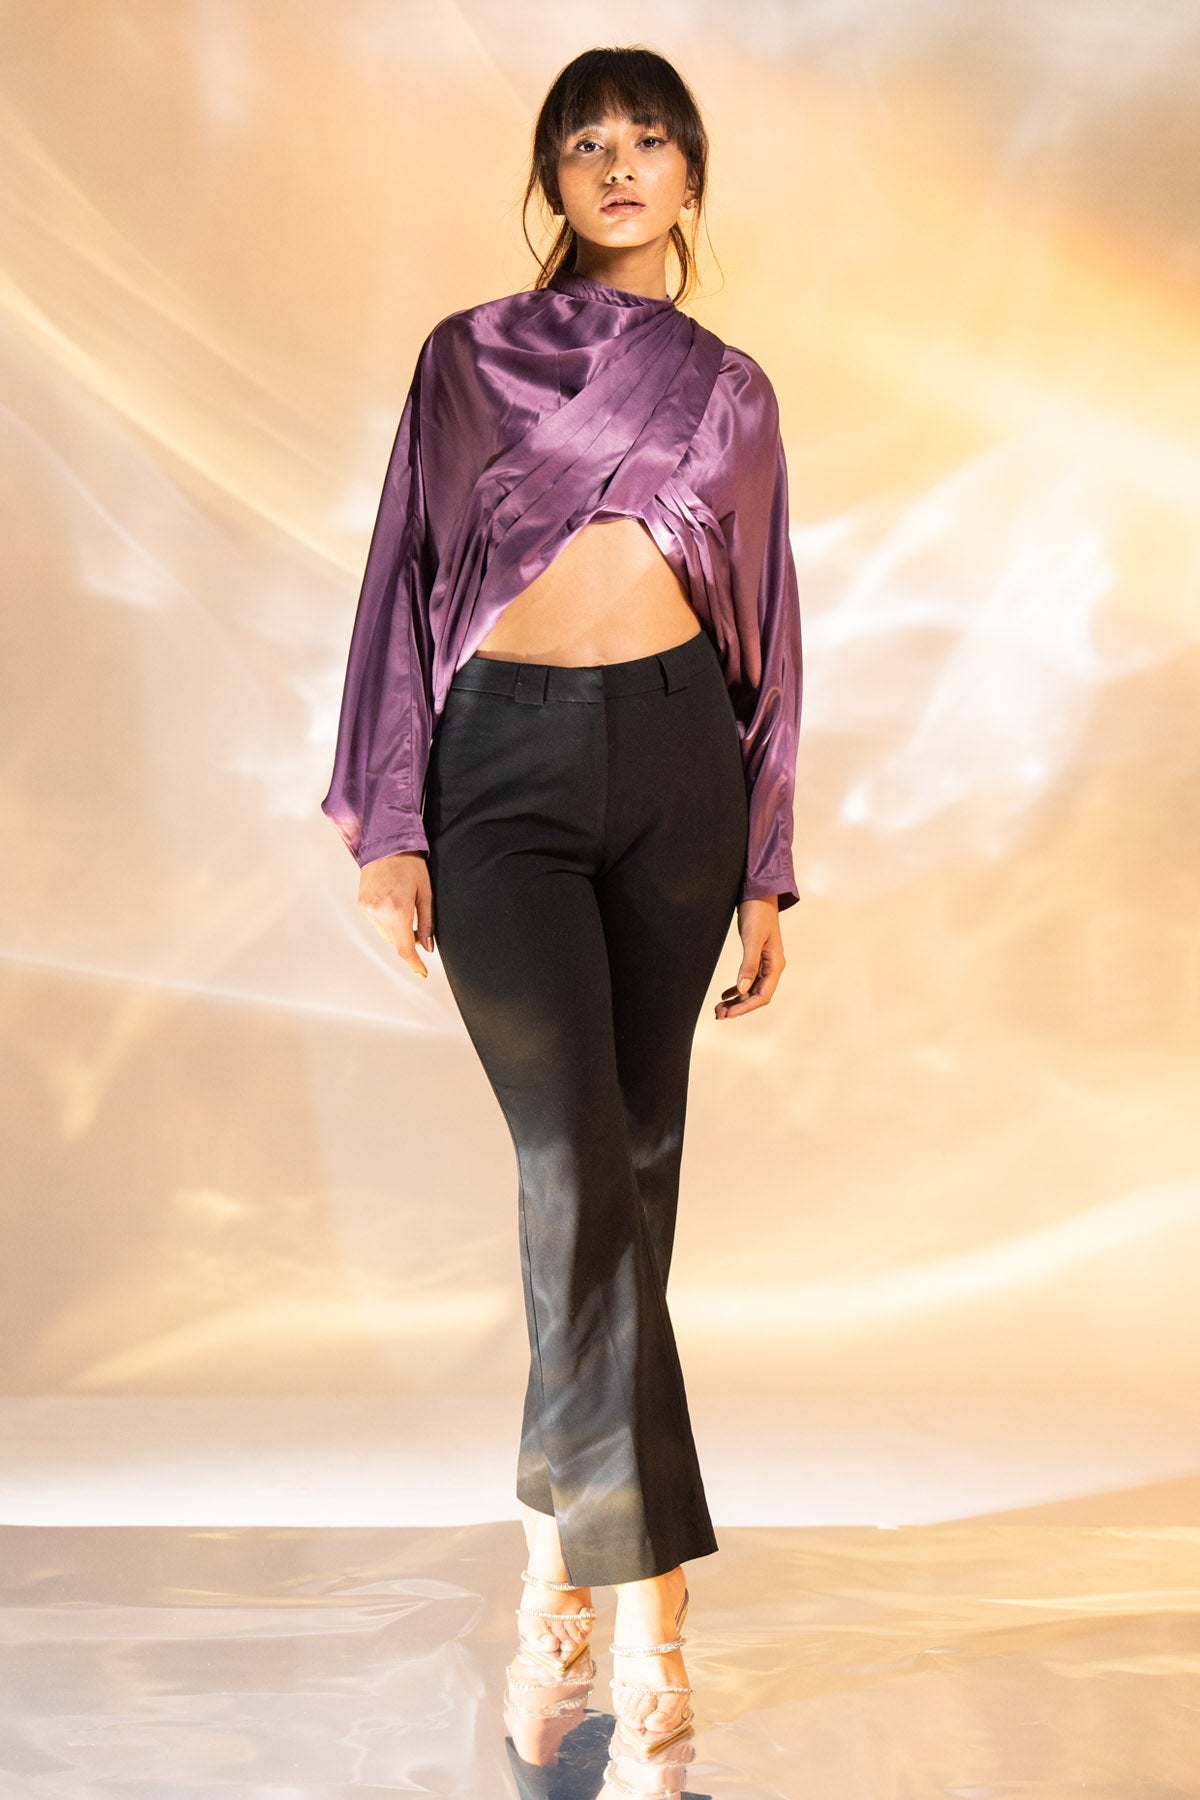 The Decem Ally Mauve Crossover Drape Top for Women online available at scrollnshops